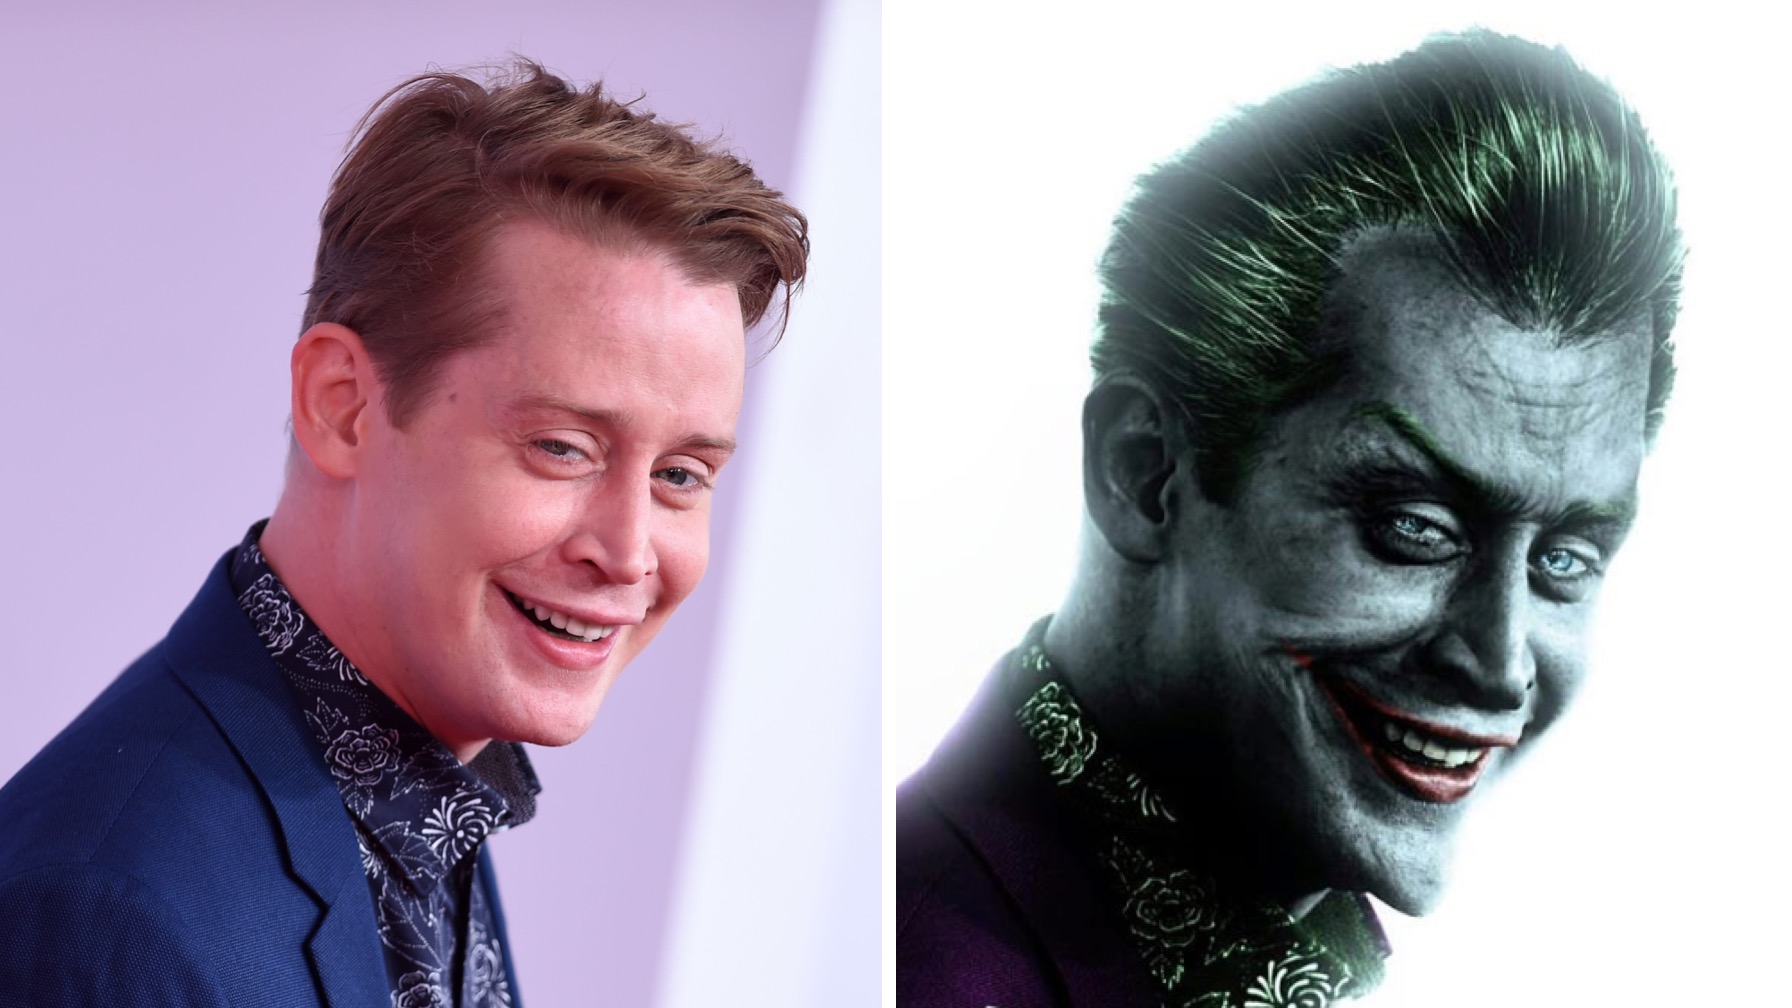 The Internet is Serious About Macauley Culkin Playing The Joker